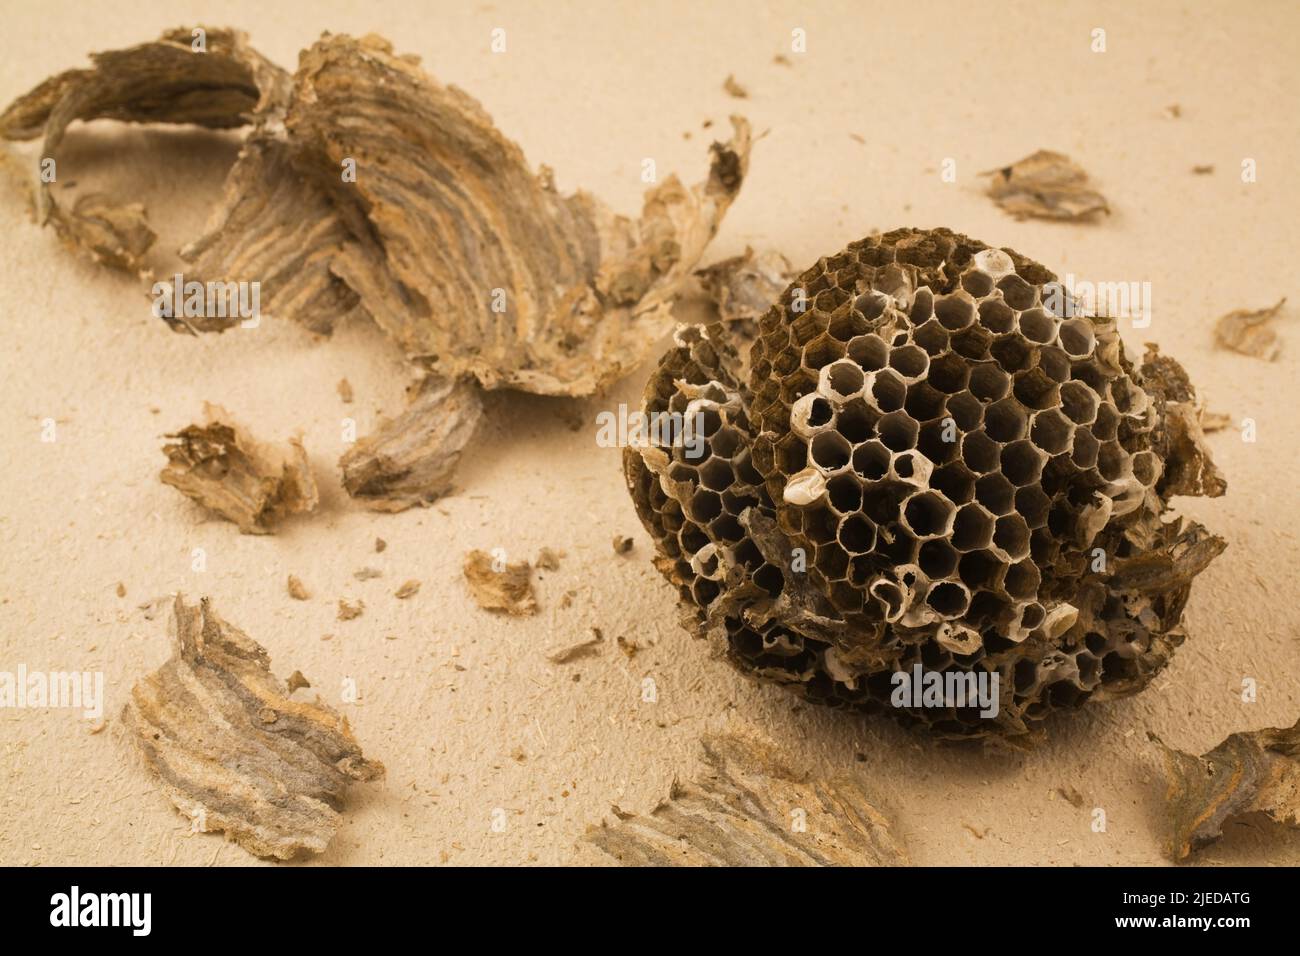 Close-up of abandoned and shattered Vespula vulgaris - Common Wasp nest on textured paper background. Stock Photo